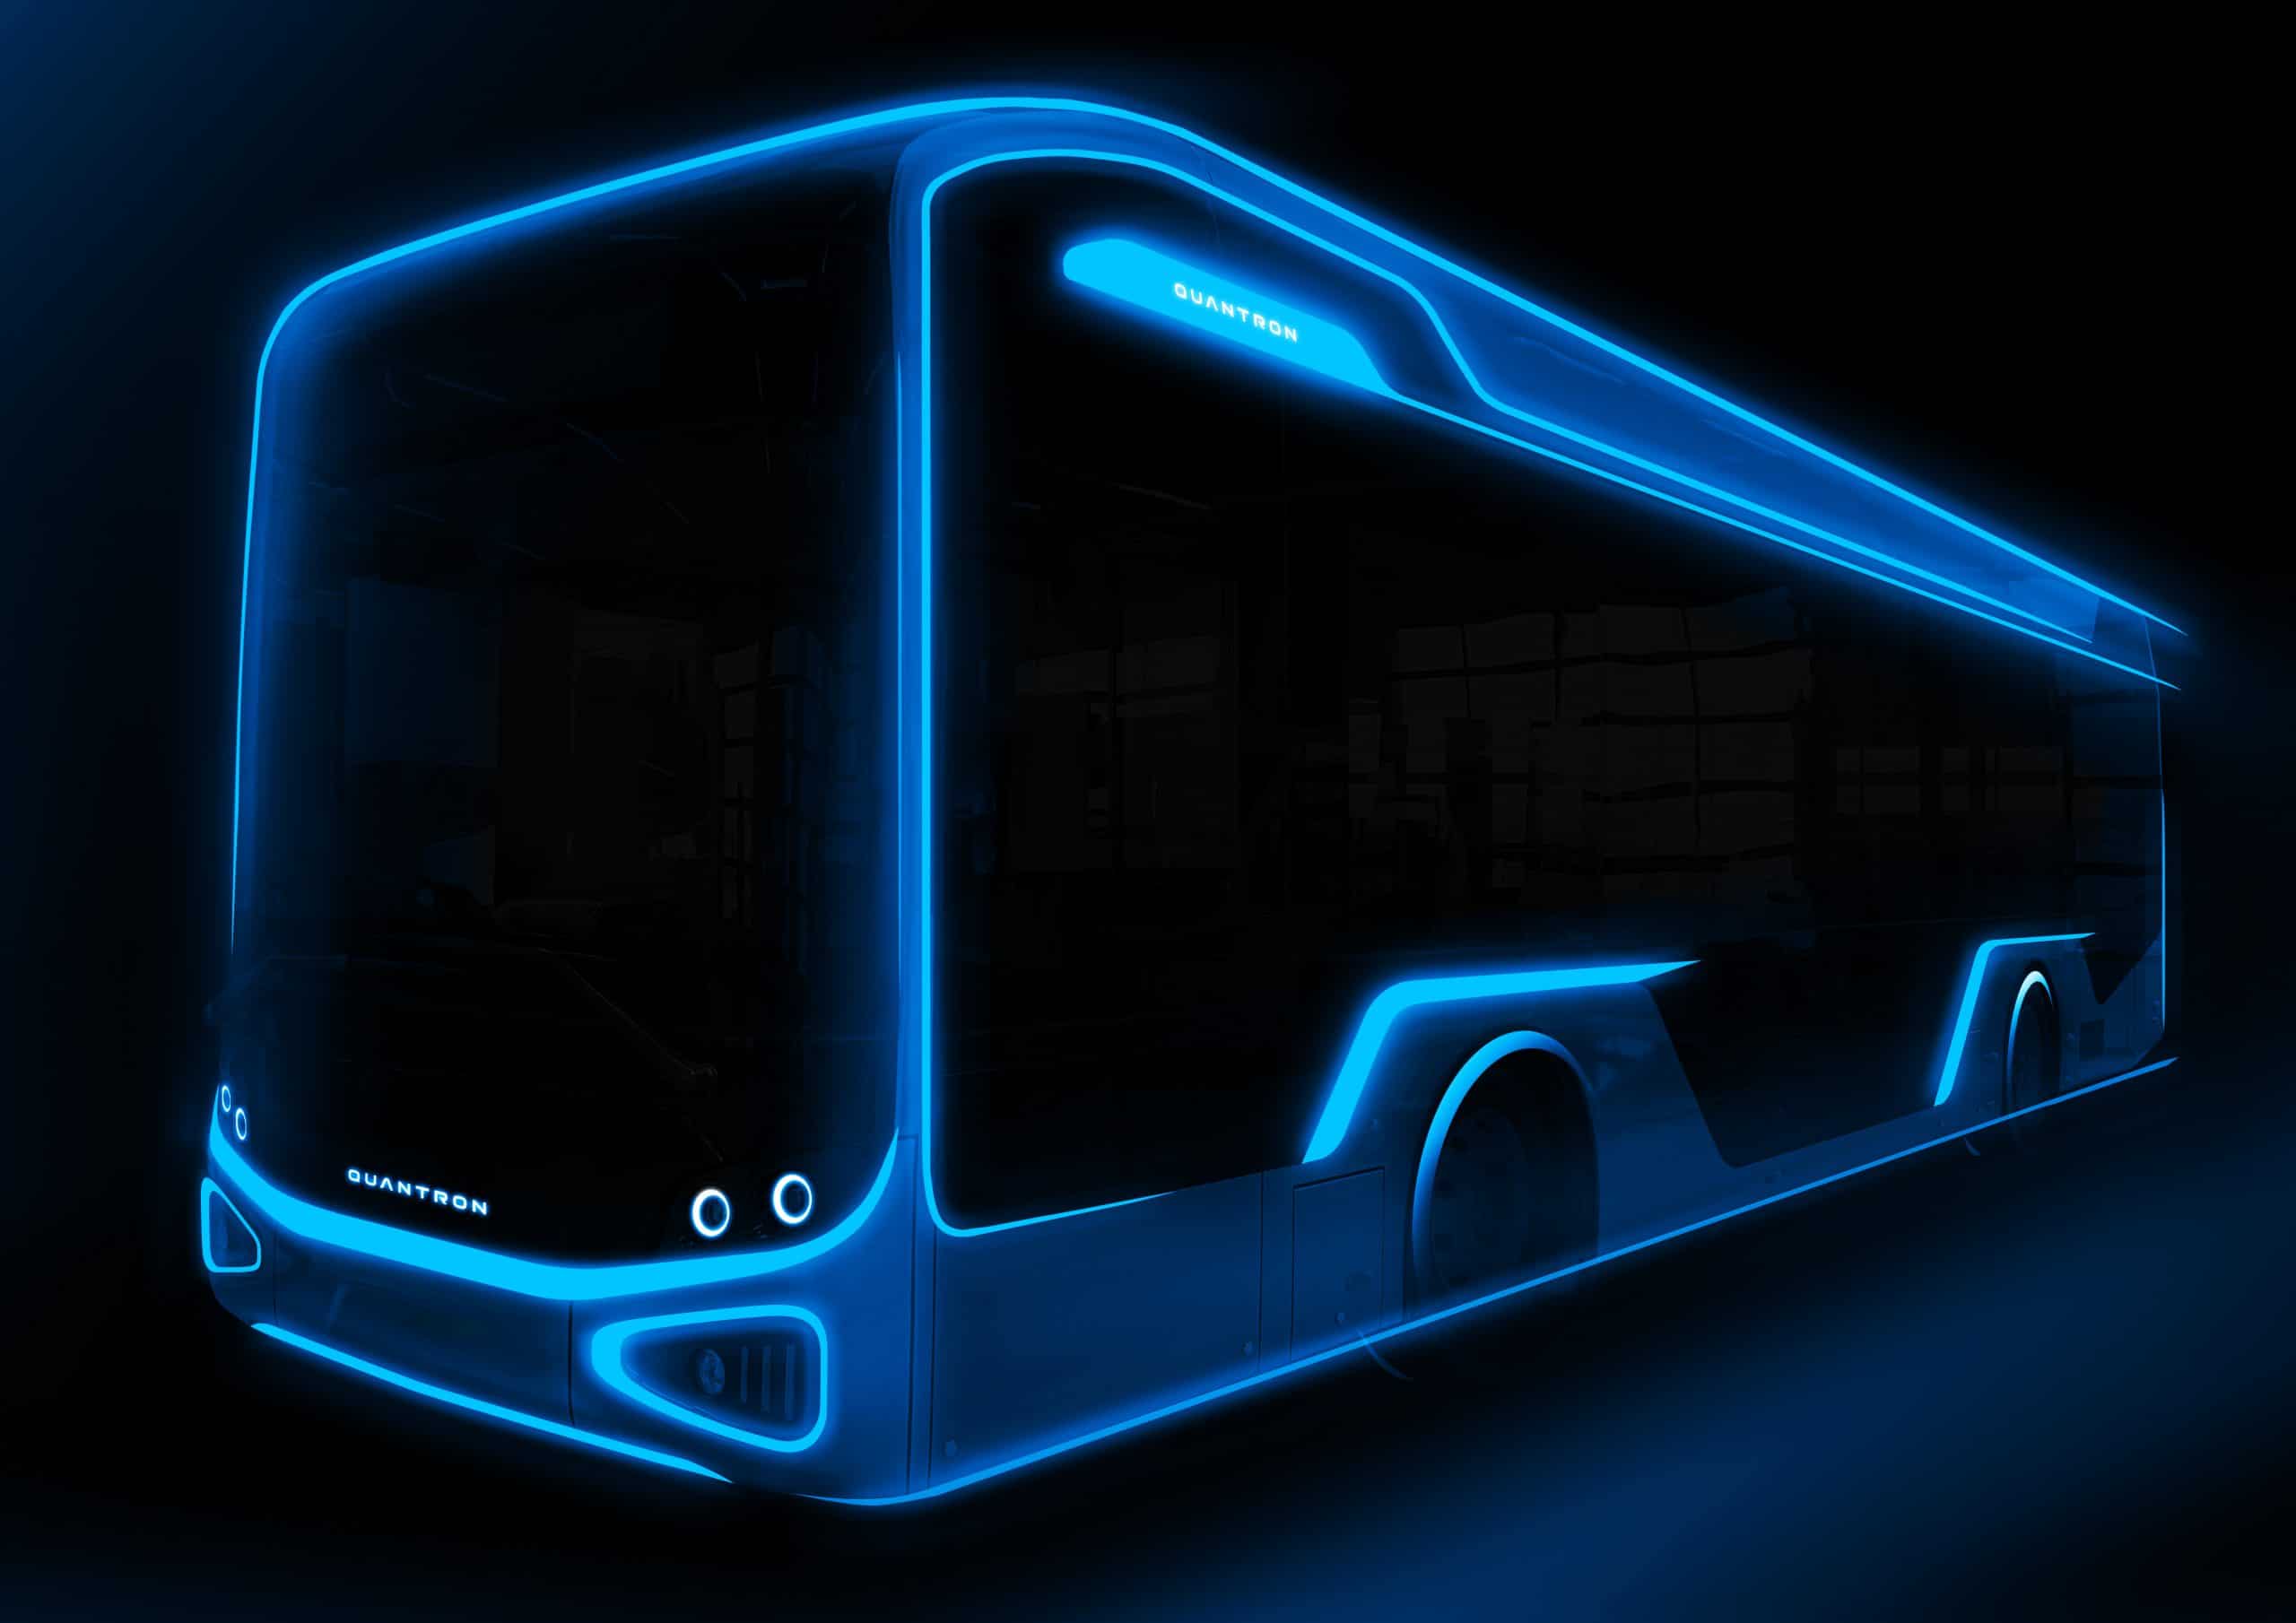 Quantron Cizaris bus to be launched on 16 February